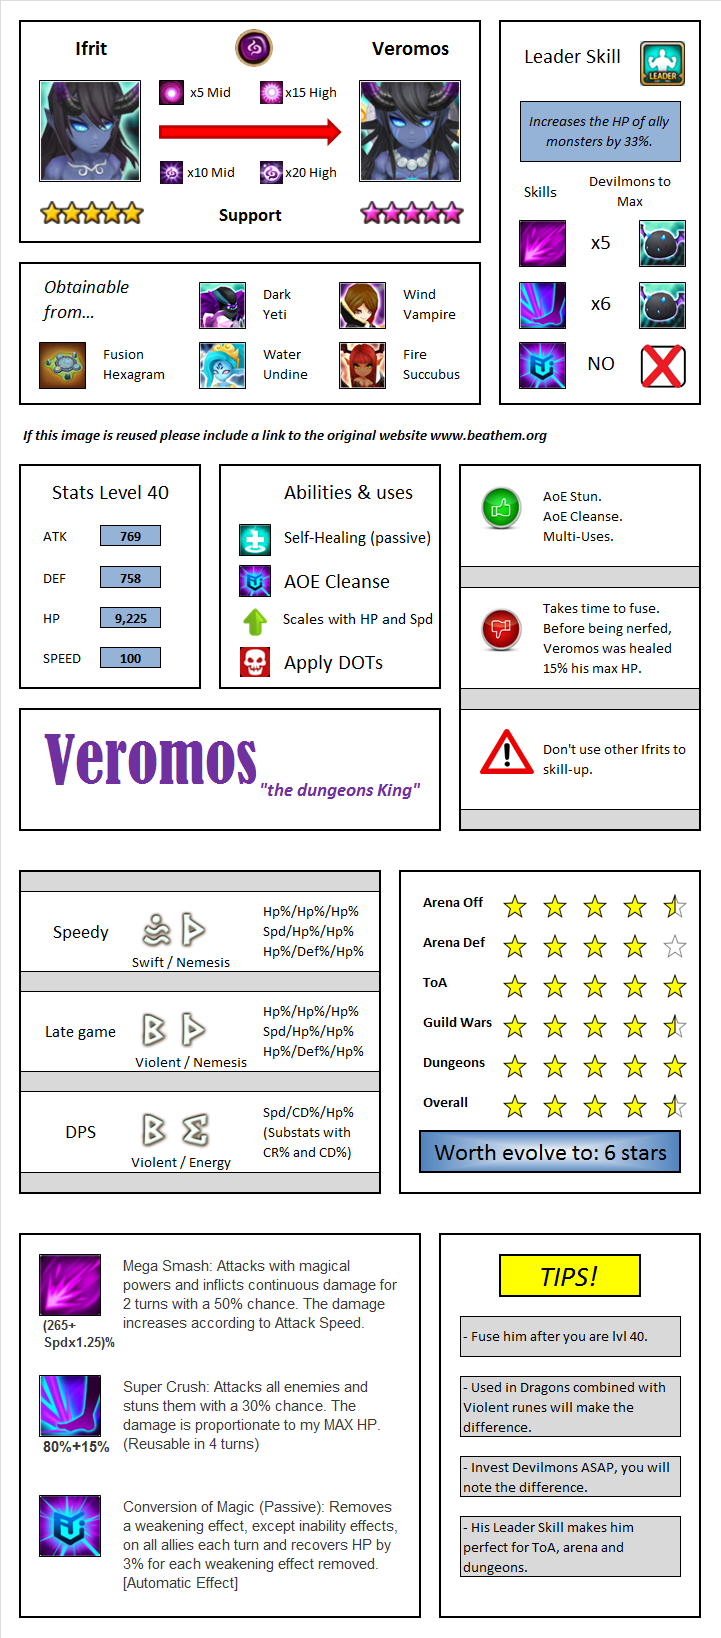 veromos ifrit infographic